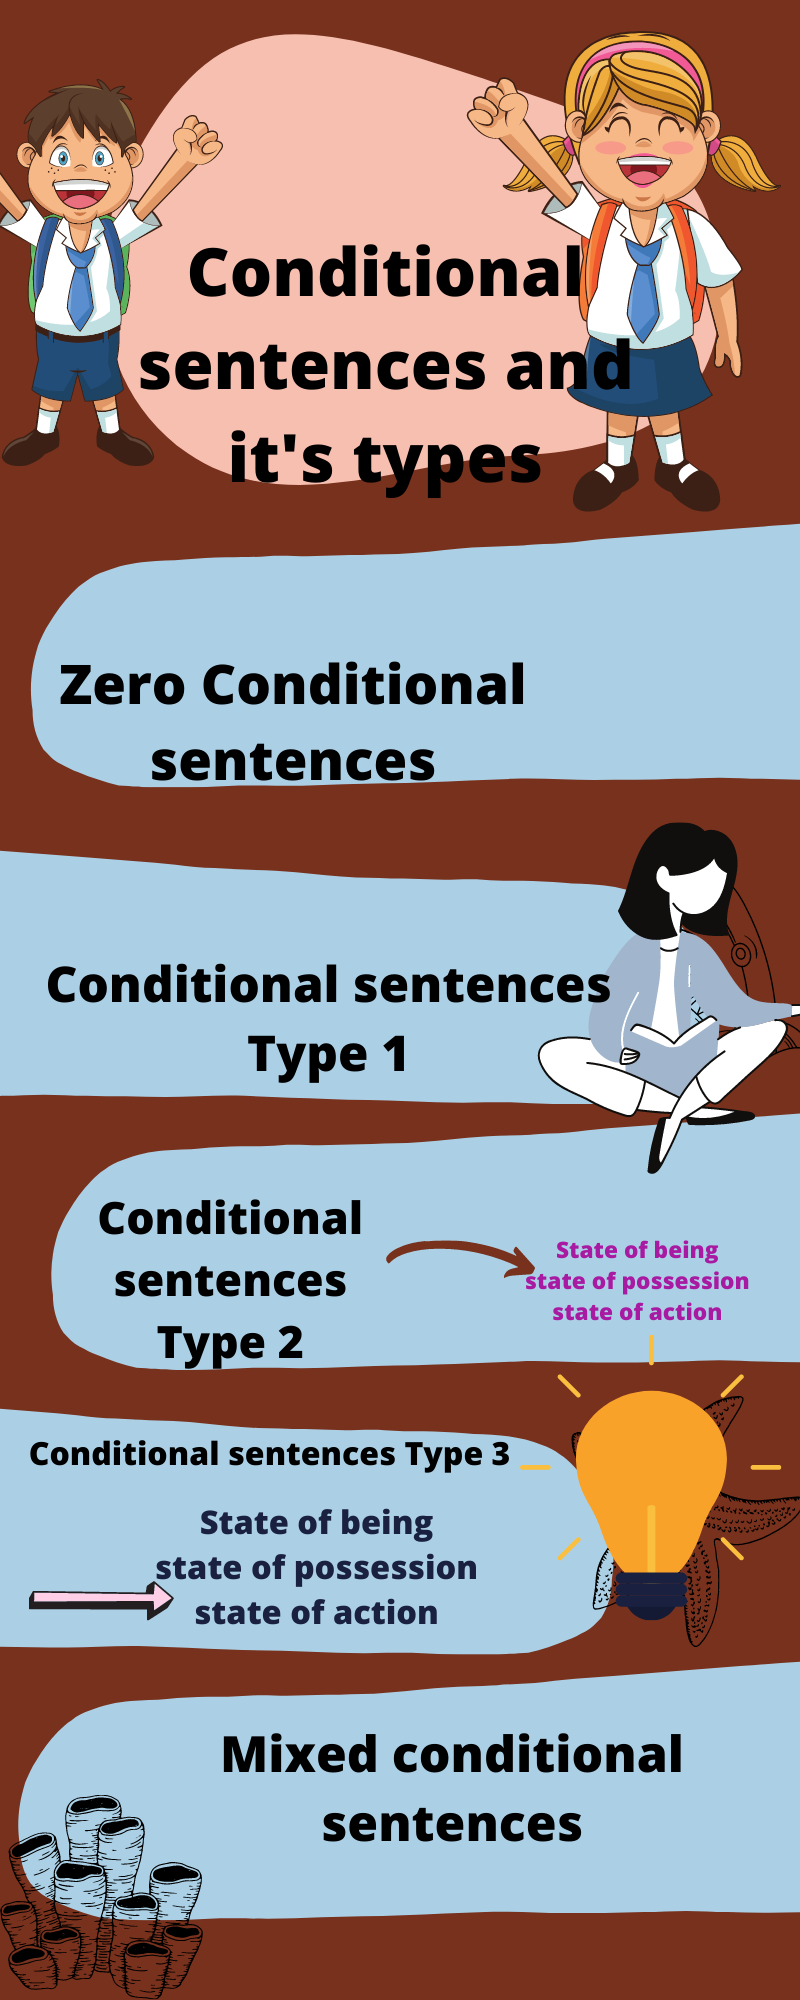 Conditional sentences and it's types